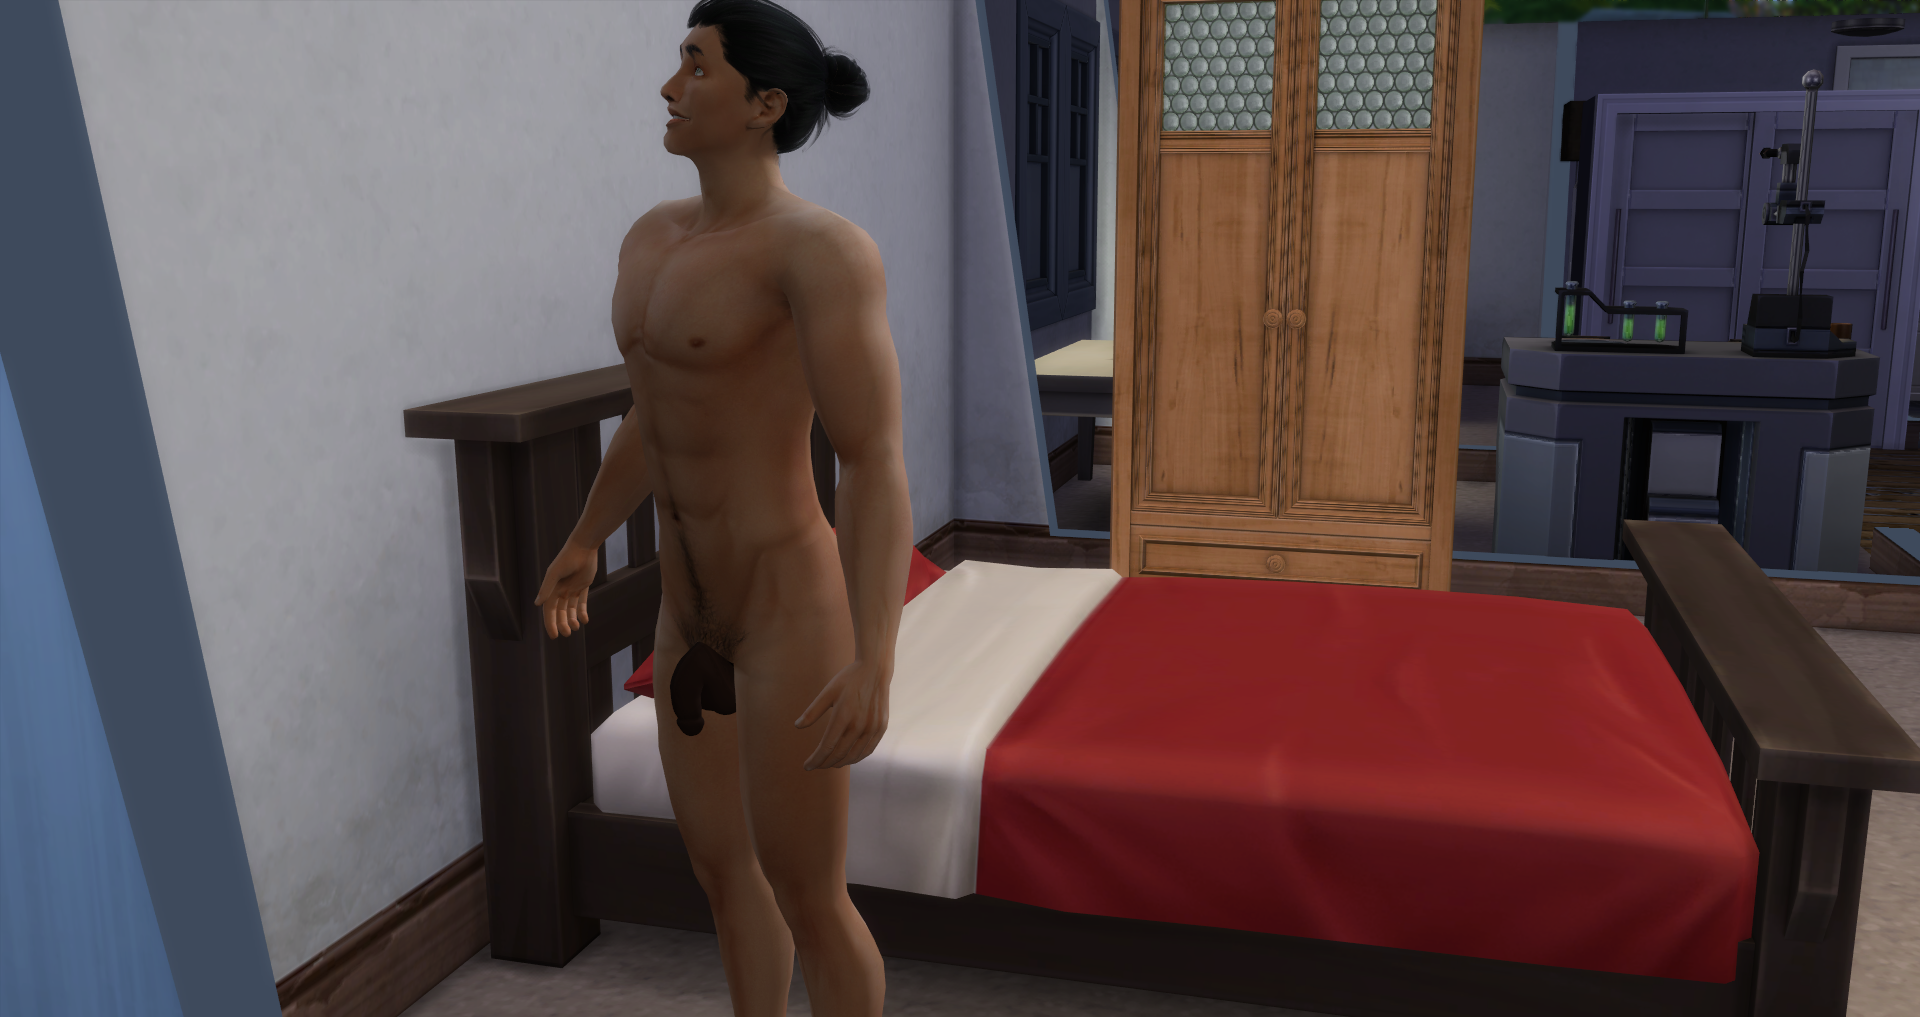 Sims 4 Pornstar Cock V30 Ww Rigged 20181115 Page 41 Downloads The Sims 4